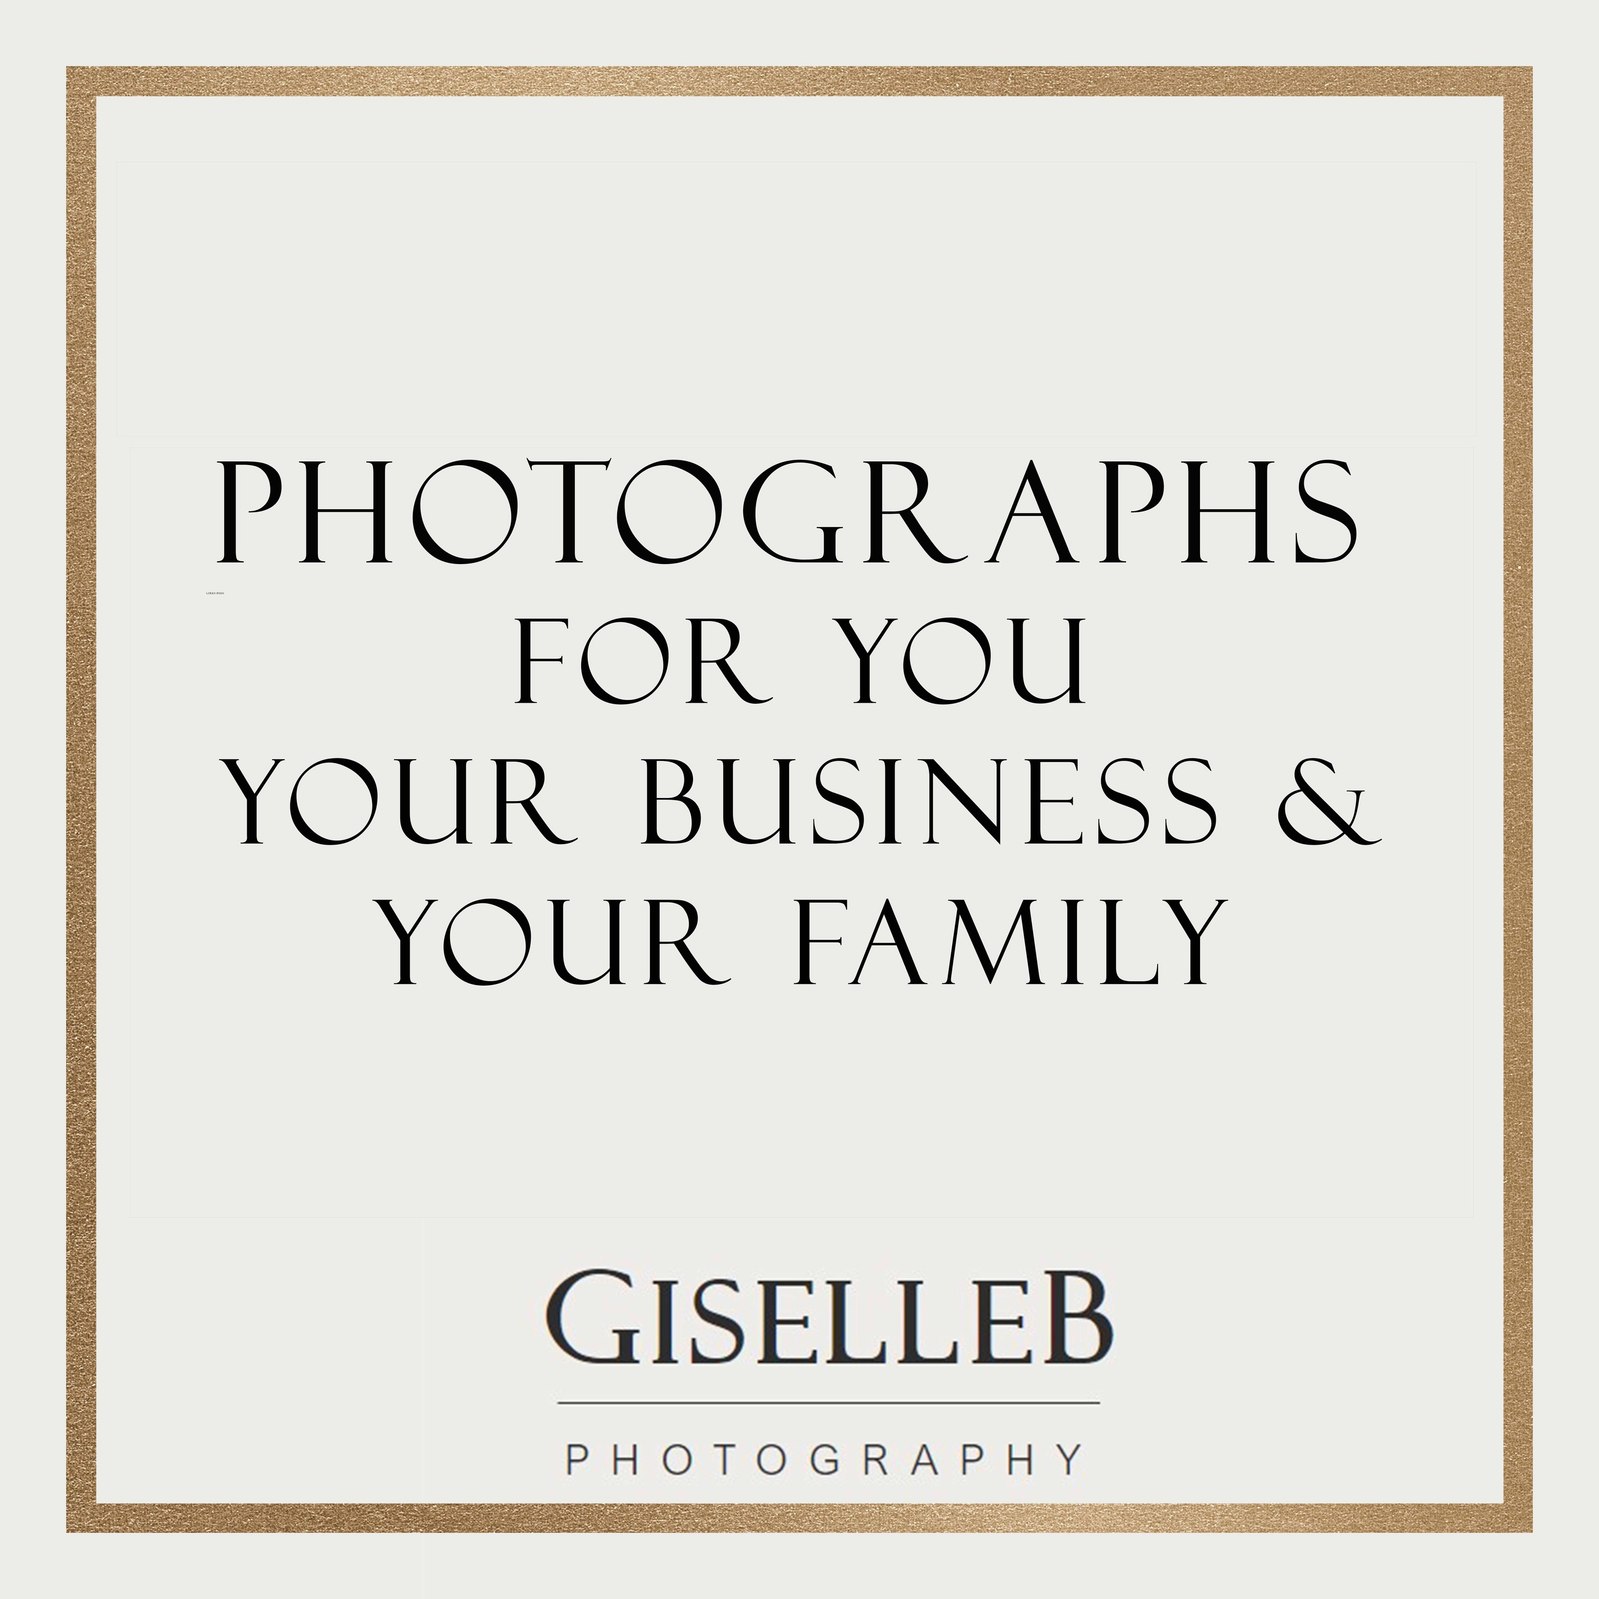 Photographer in Tauranga specialising in Portrait, business headshots, personal branding, family photography, maternity, newborn, children mother and daughter, couples, engagements